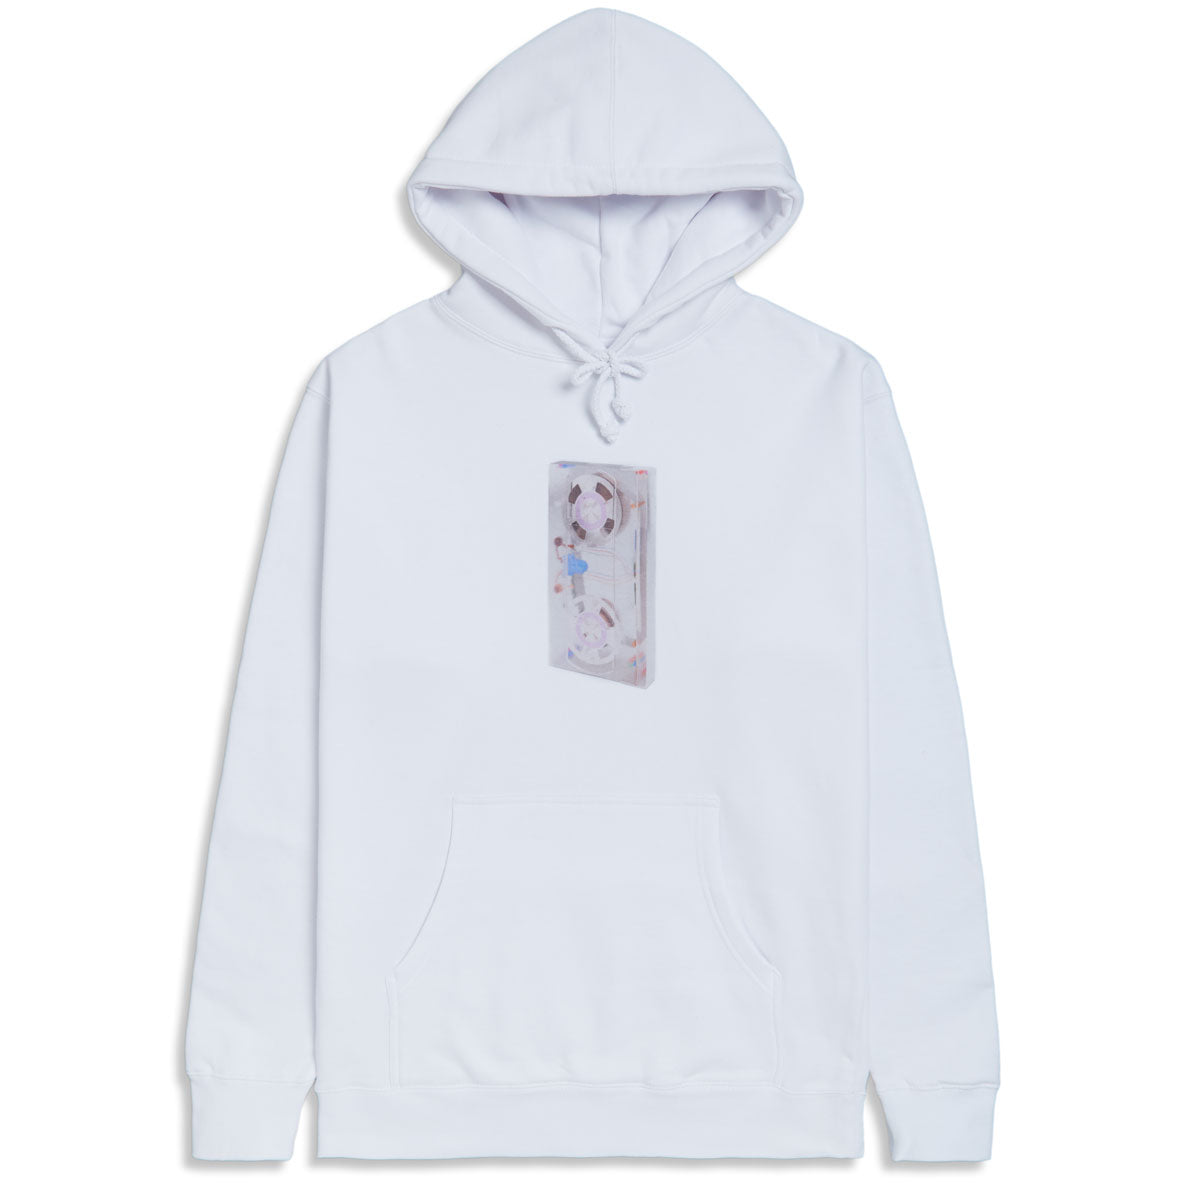 CCS Going Clear VHS Hoodie - White - SM image 1